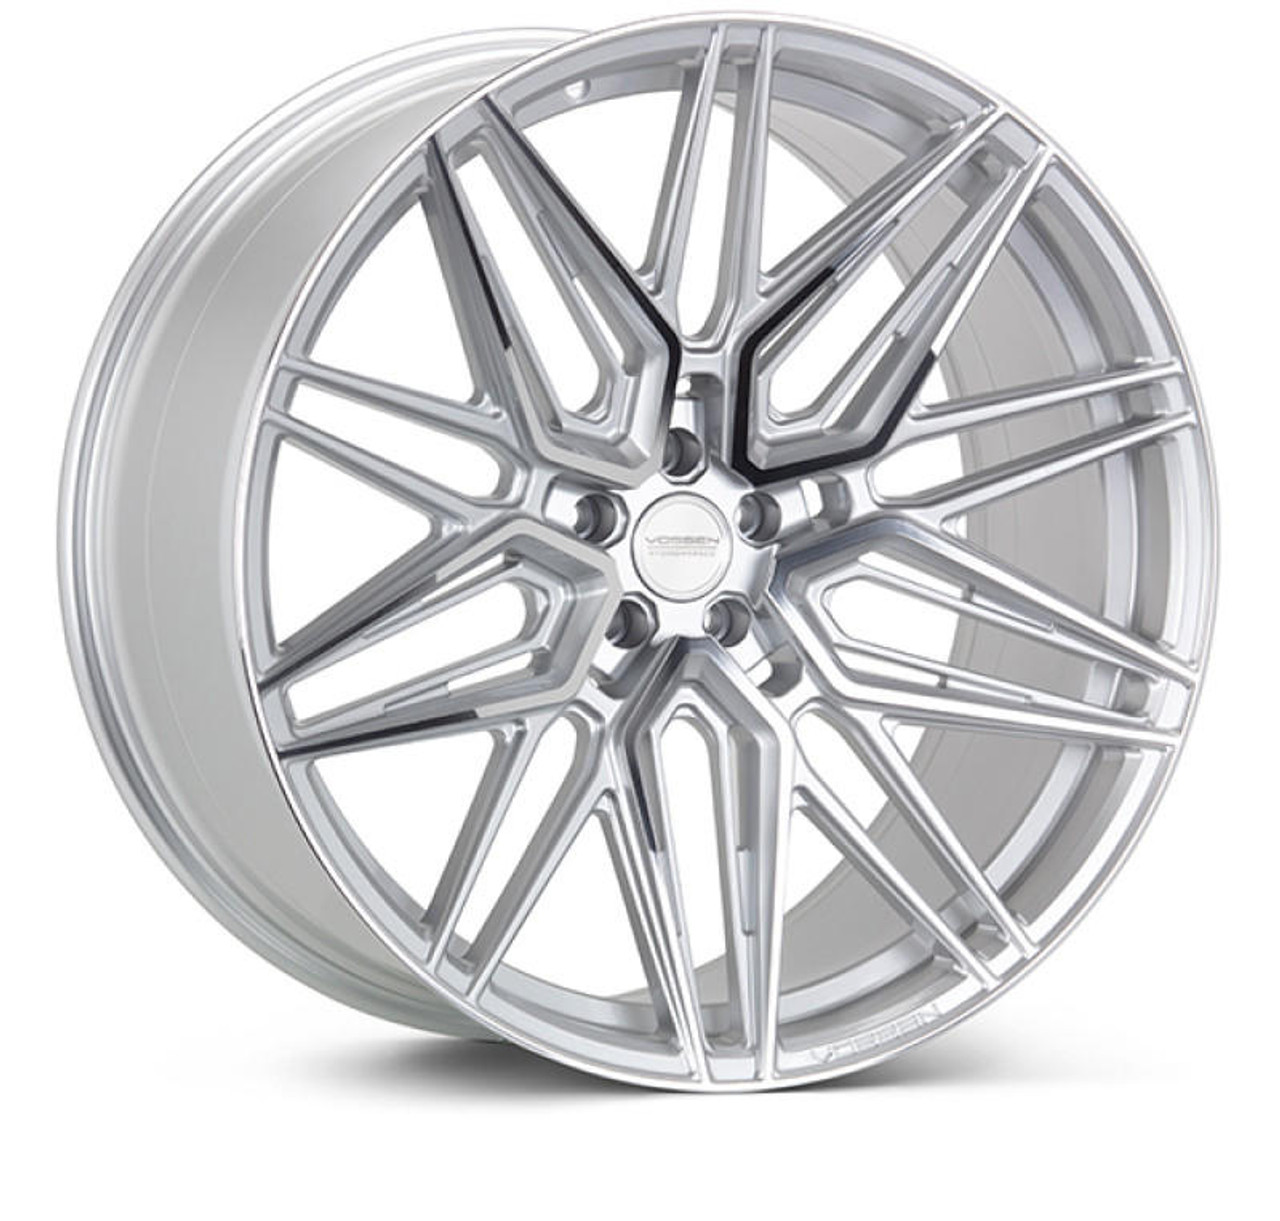  Vossen HF-7 23x10 / 5x120 / ET32 / Mid Face / 72.56 - Silver Polished - HF7-3B50 